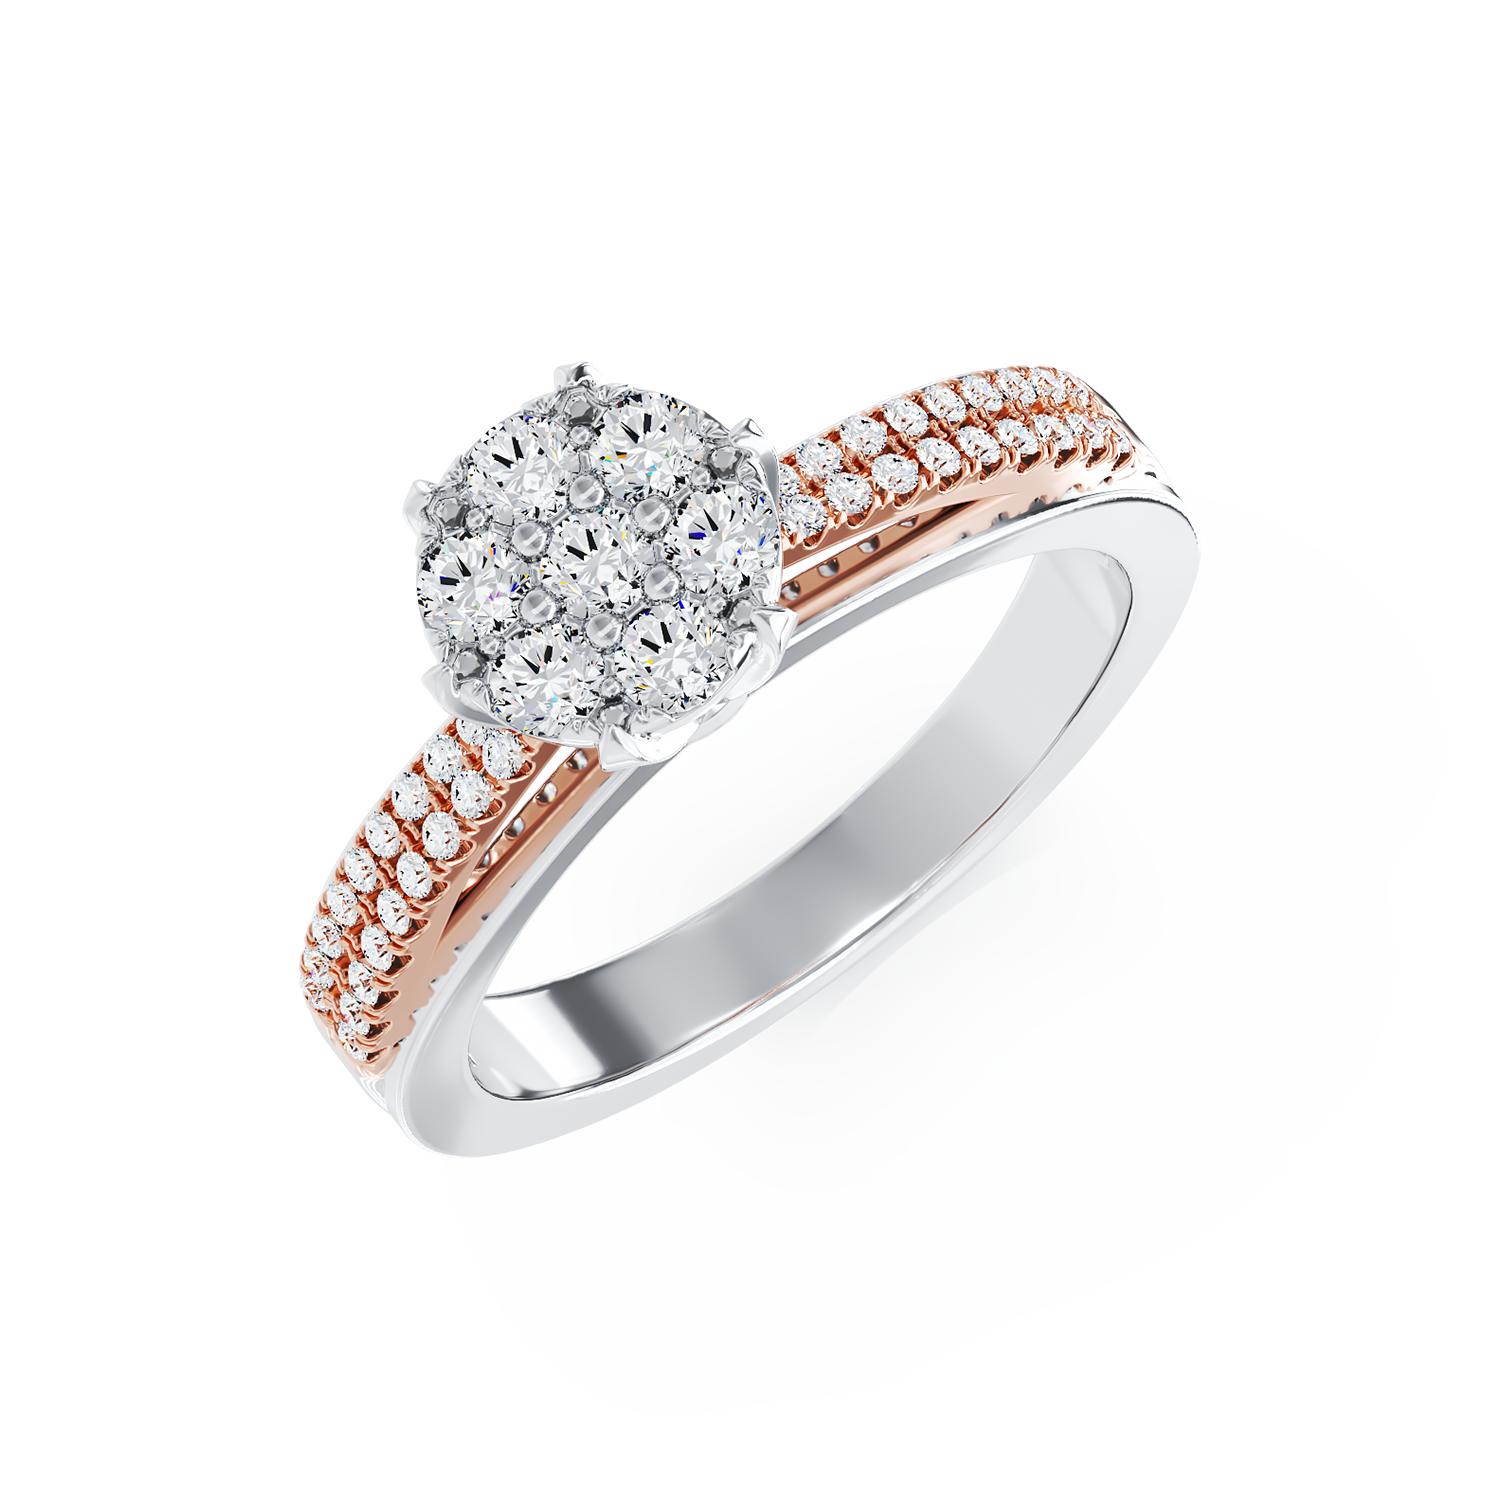 18K white-rose gold engagement ring with 0.36ct diamonds